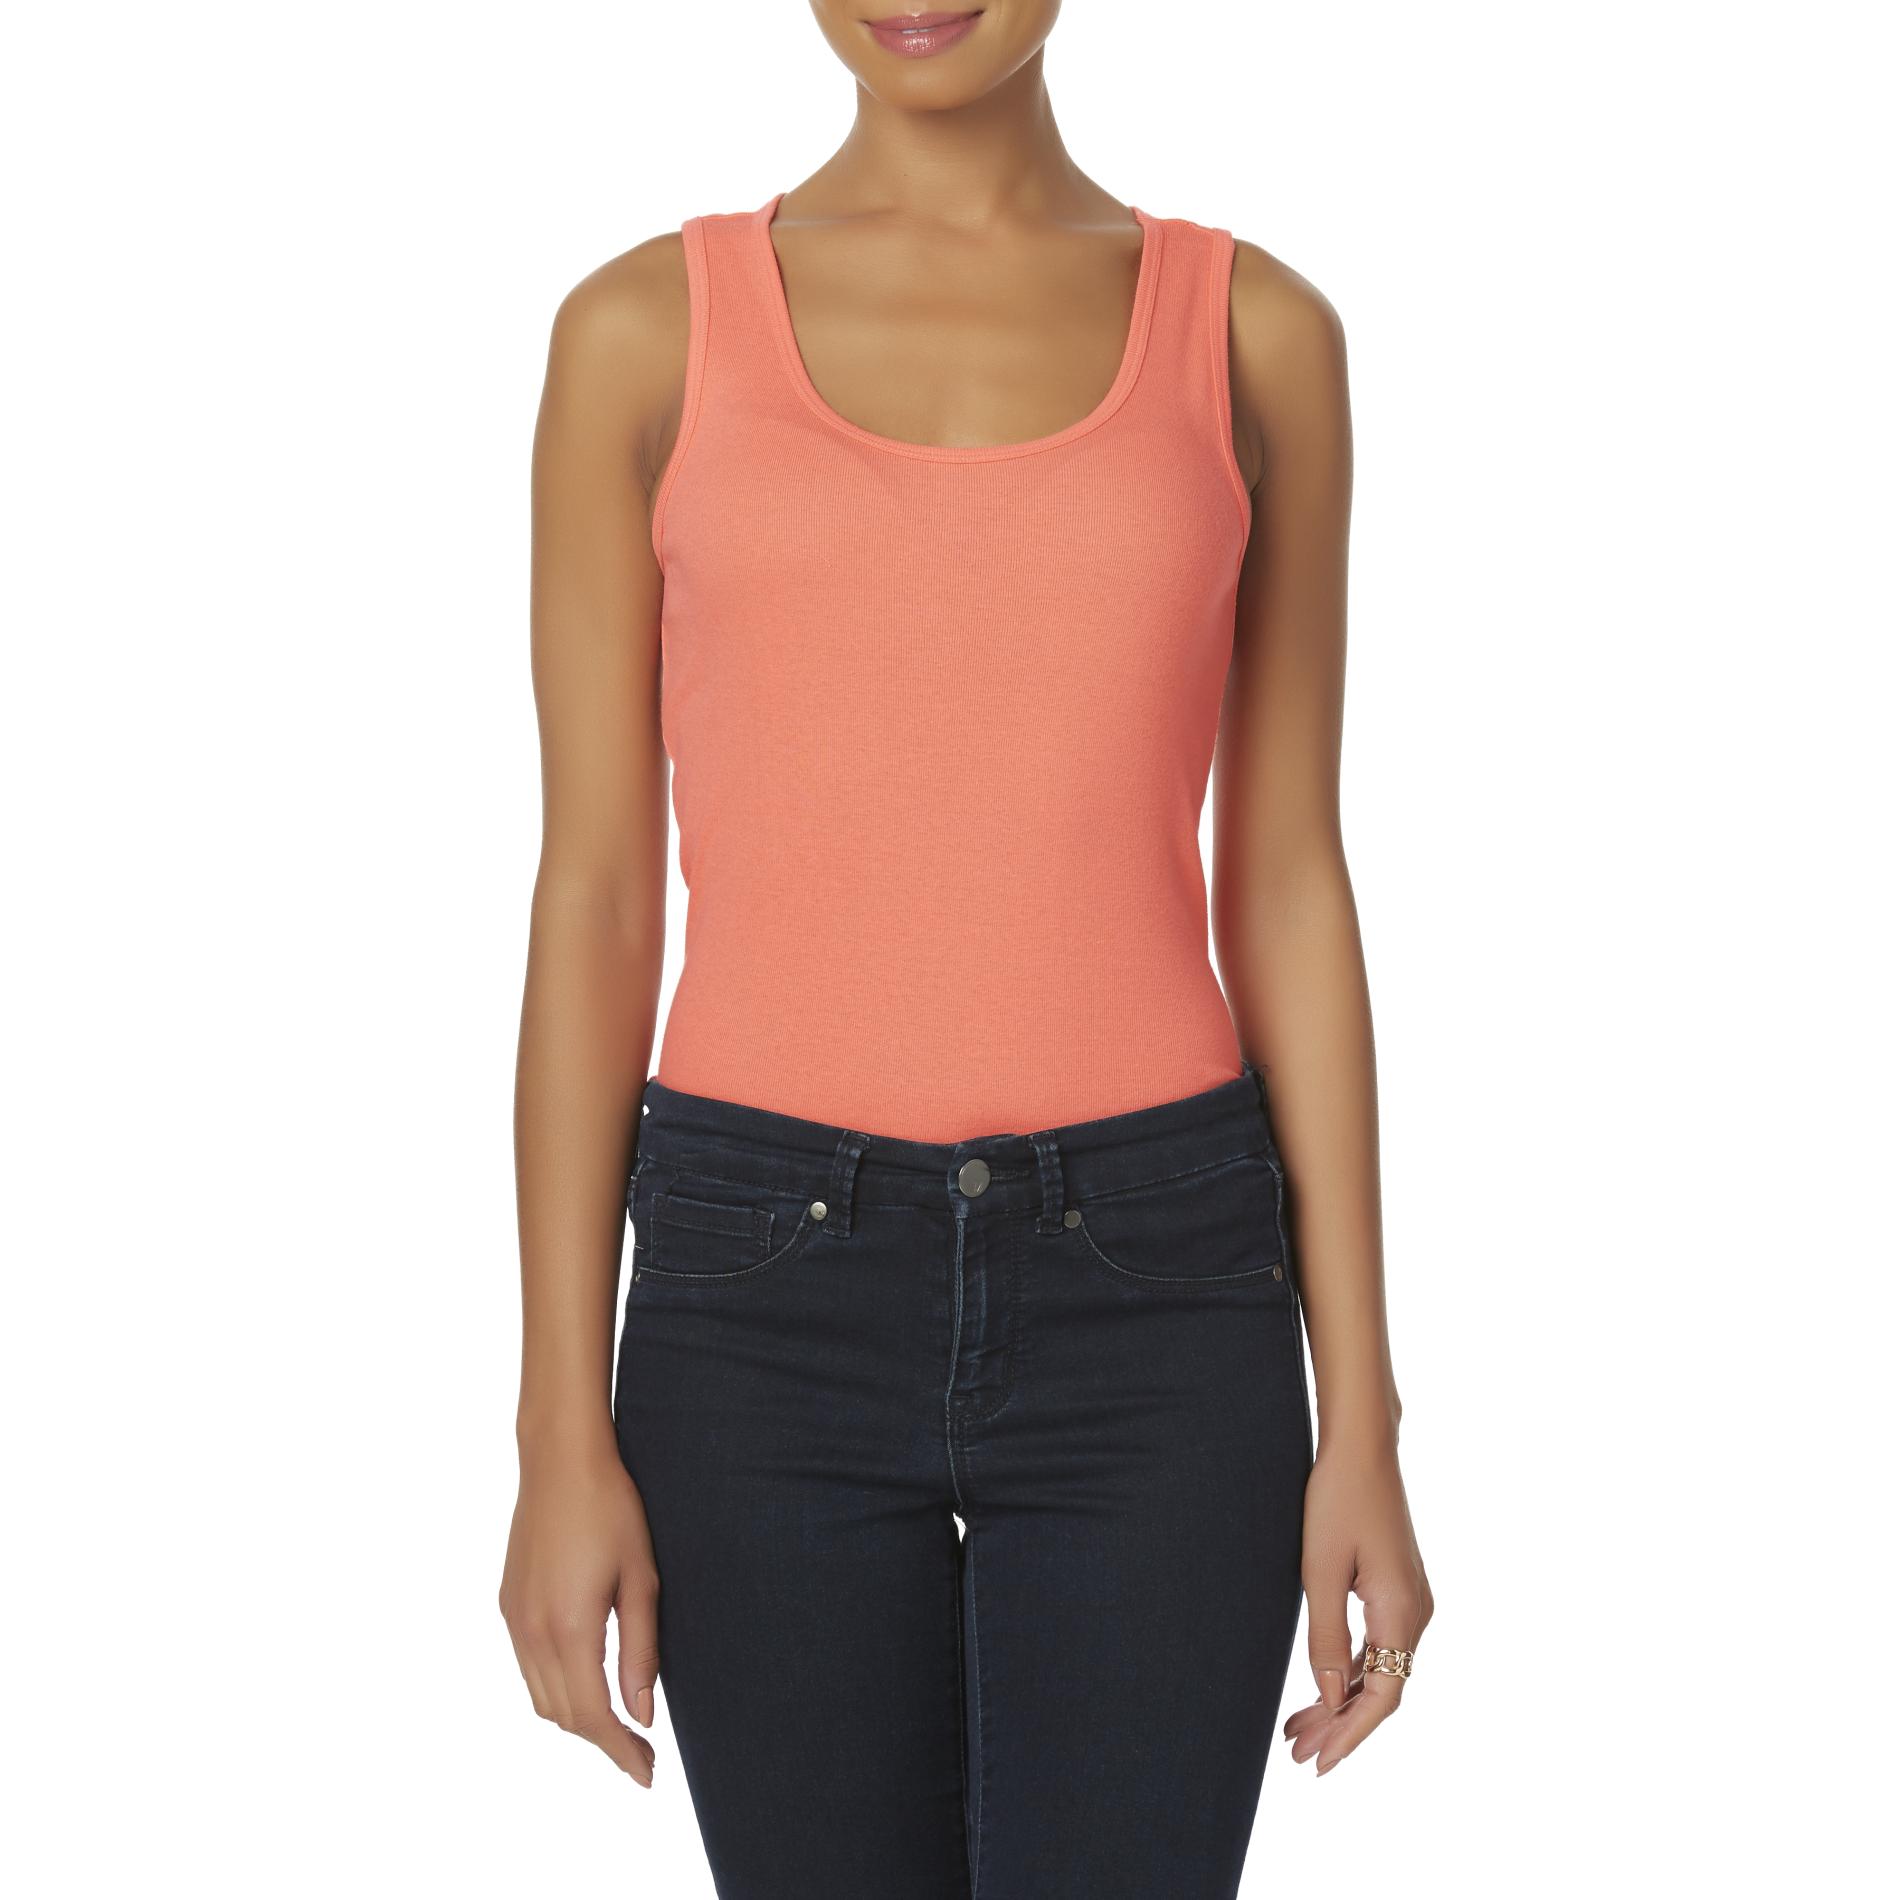 Simply Styled Women's Tank Top